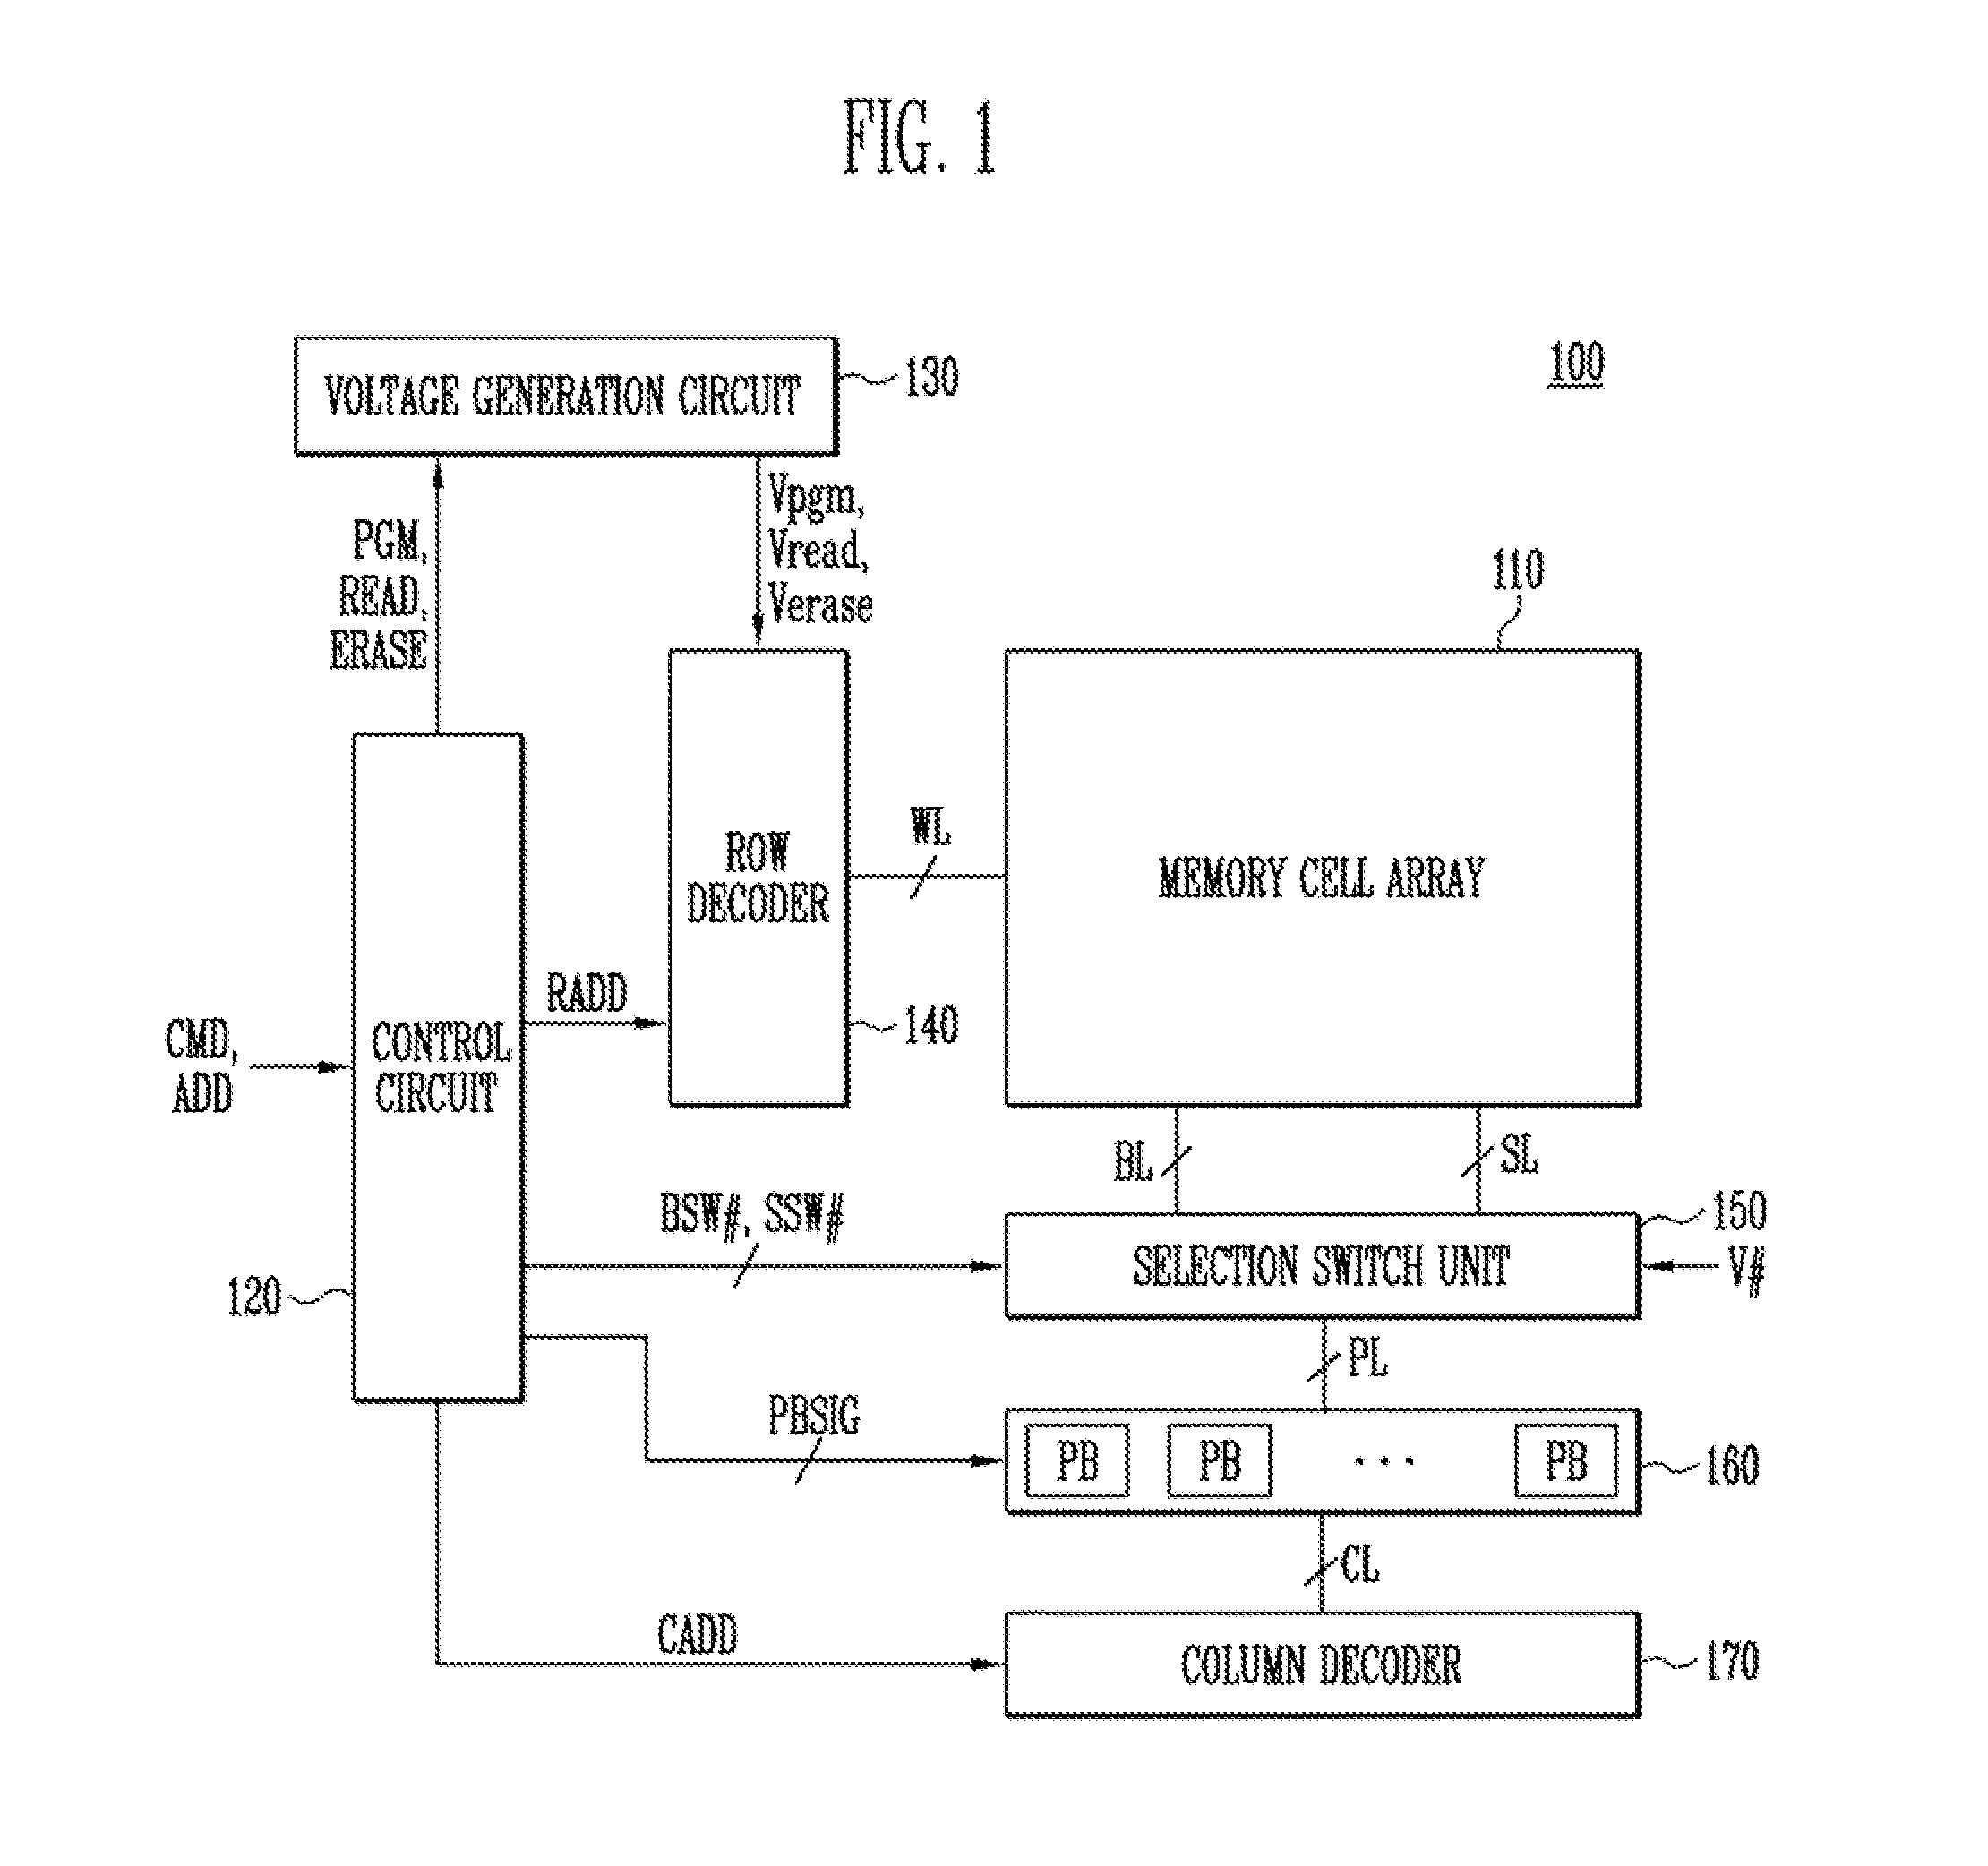 Semiconductor device and method of operating the same